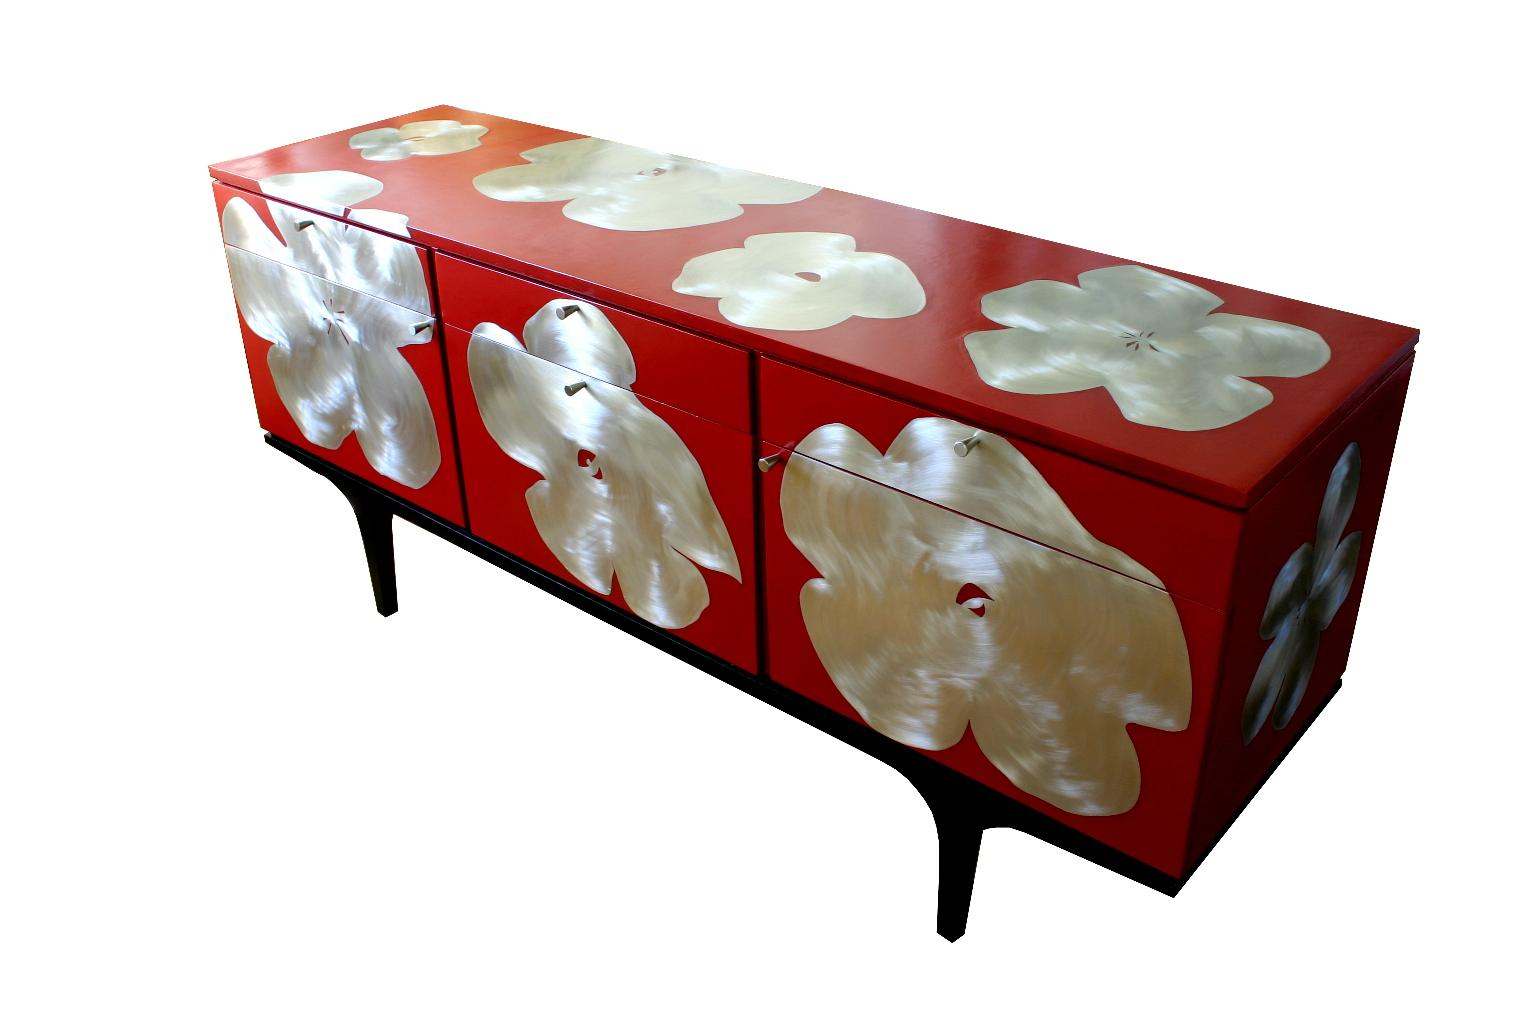 Sheet metal inlaid with red gesso on a reconditioned 20th century sideboard. All Kate's pieces are one-offs so dimensions and shape of the sideboard will vary, but pieces can be sourced to meet individual requirements.